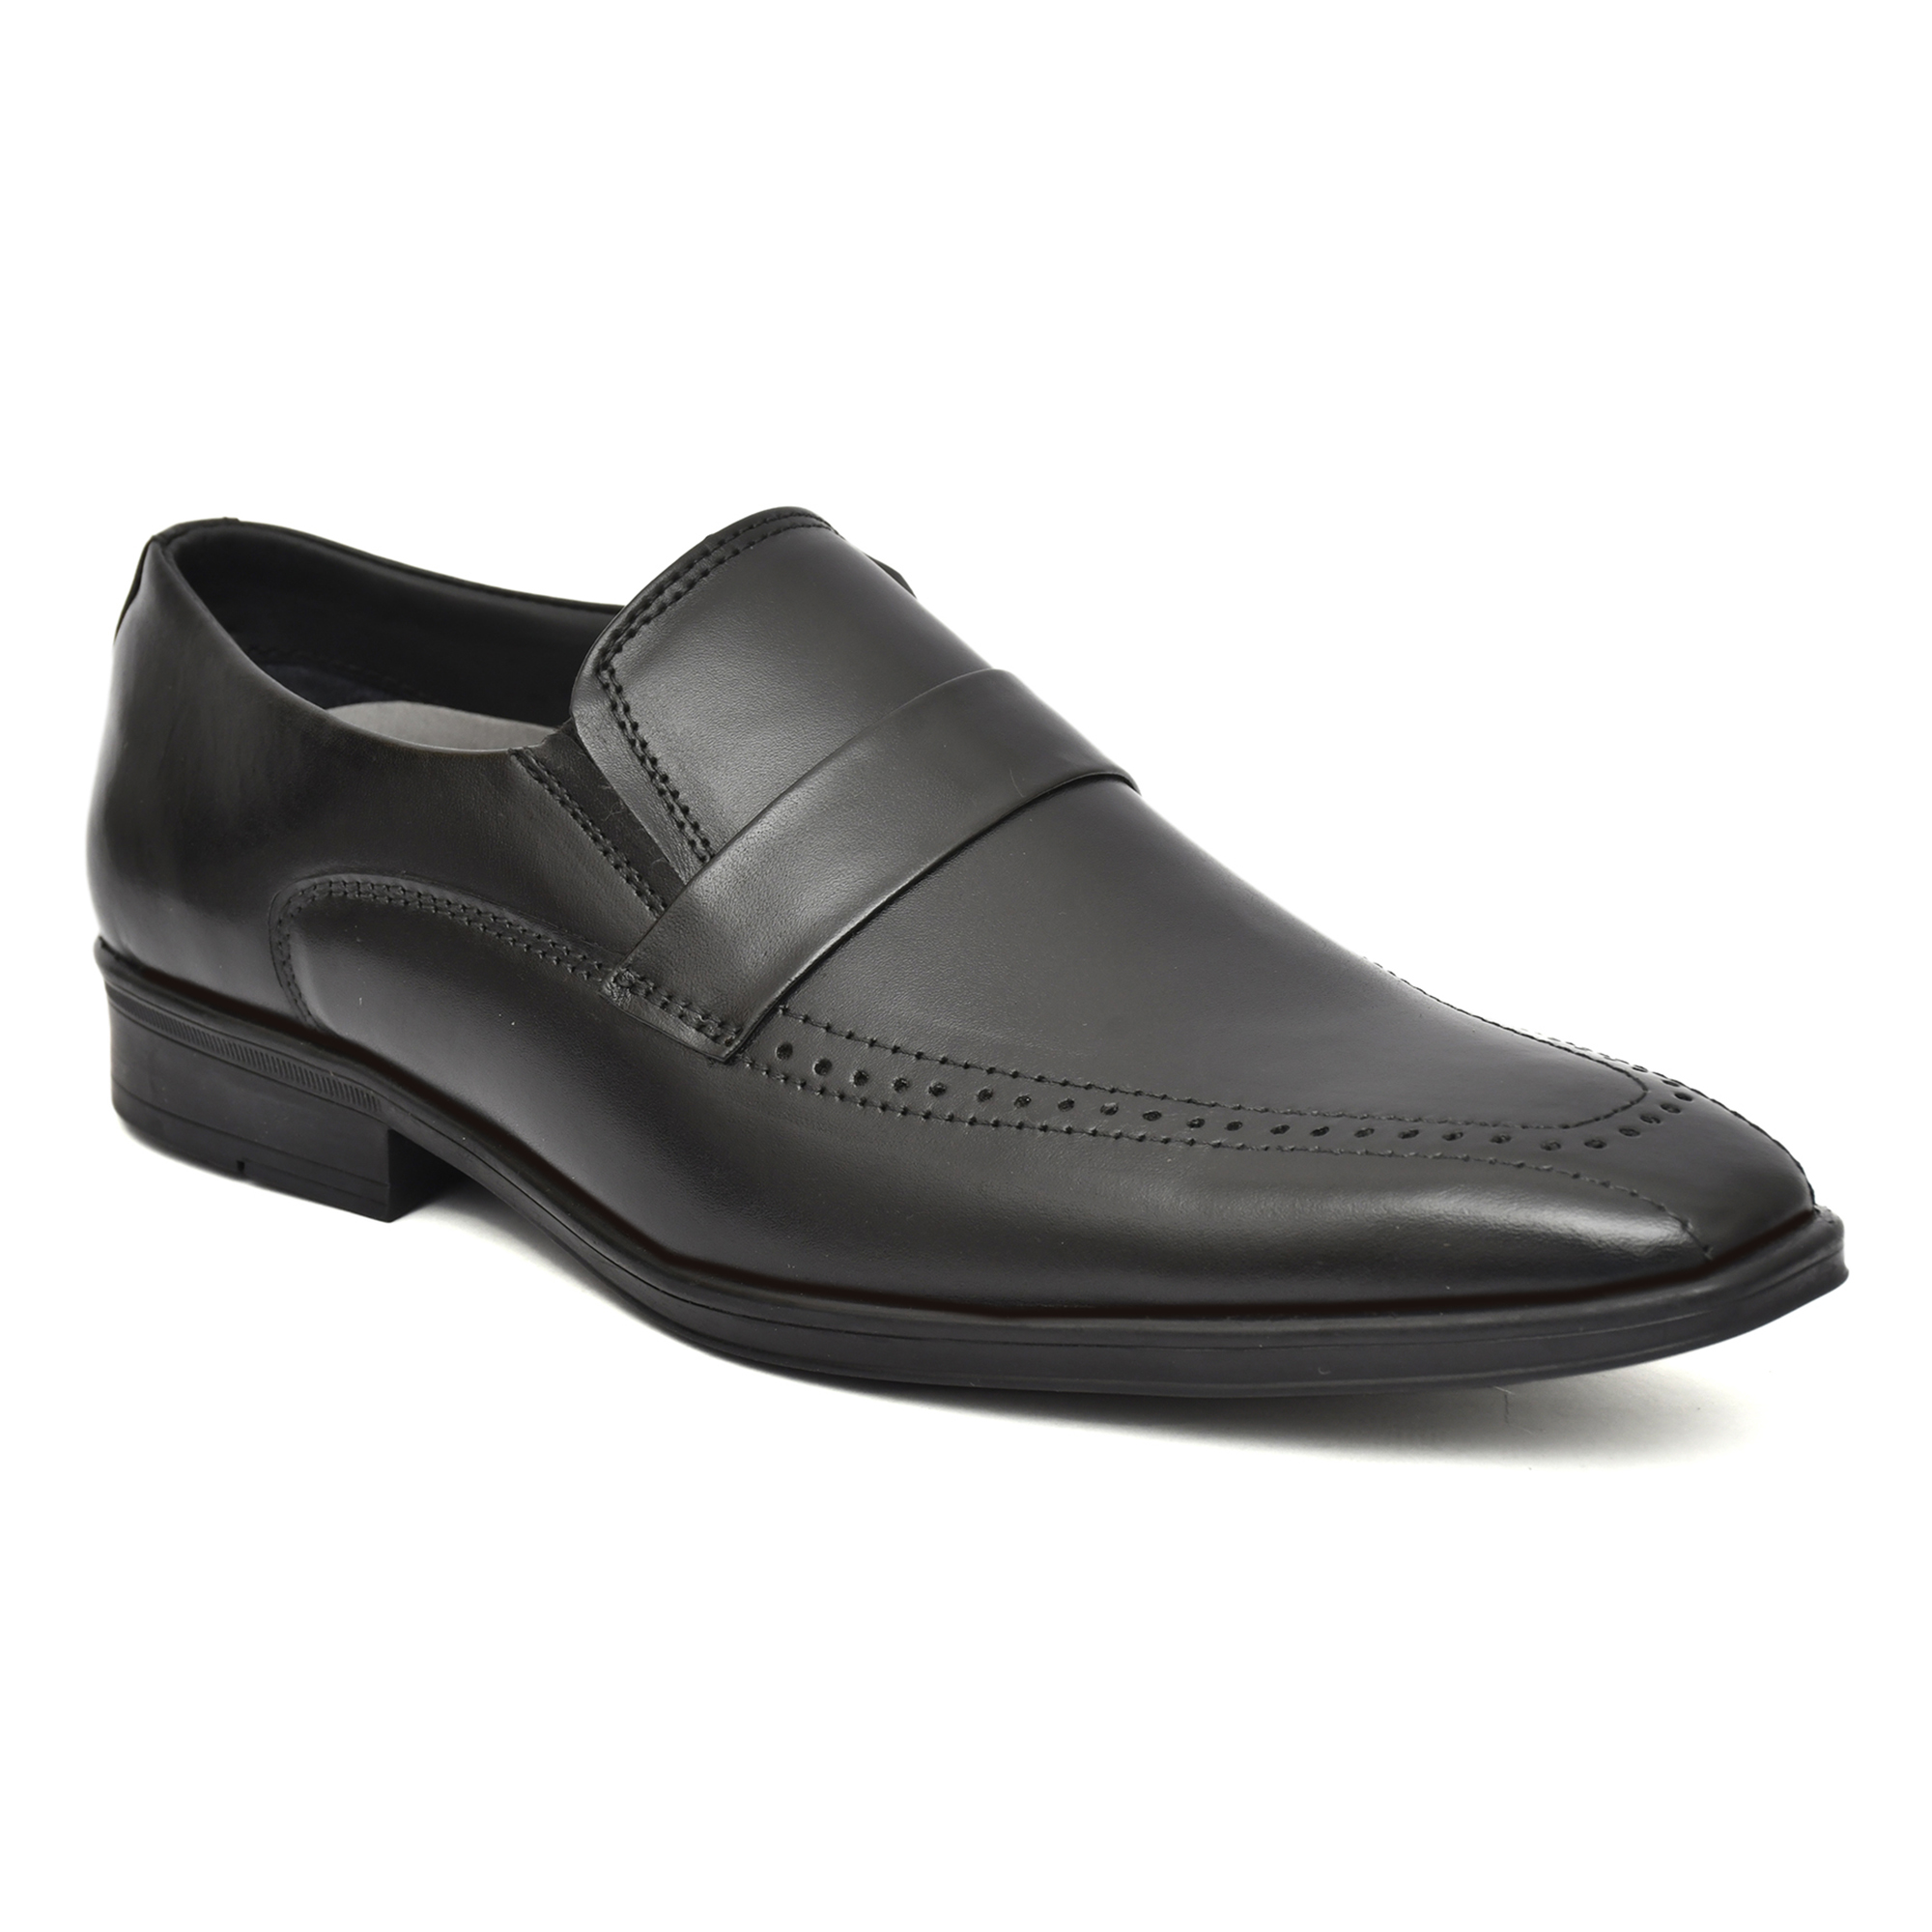 leather penny loafers for Men with Memory foam footpad by asm.